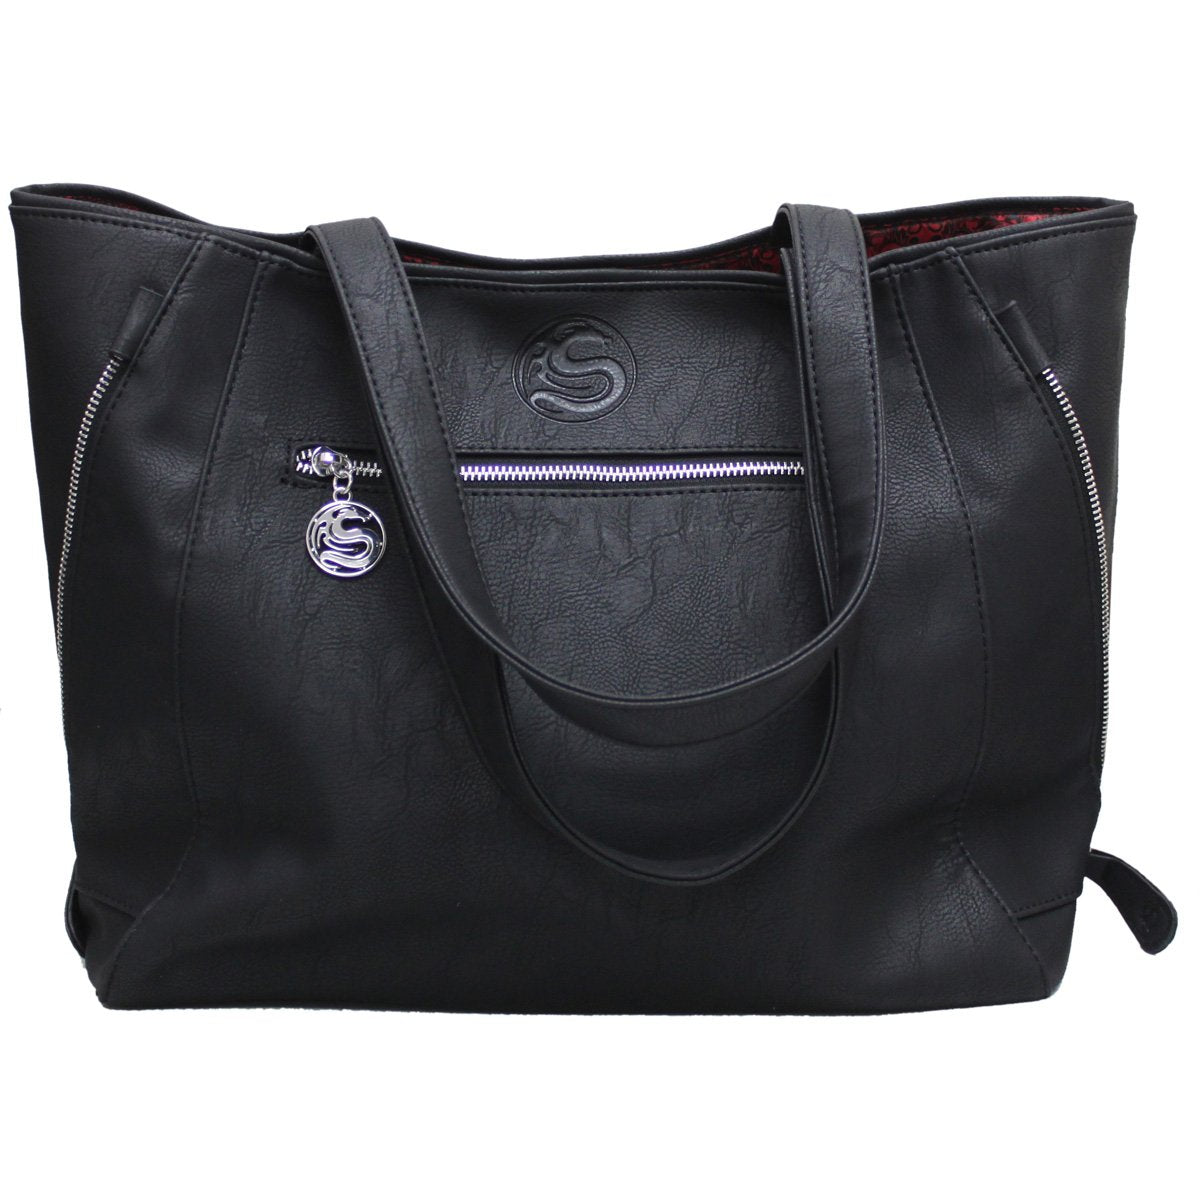 BLACK CAT - Tote Bag - Top quality PU Leather Studded - Spiral USA